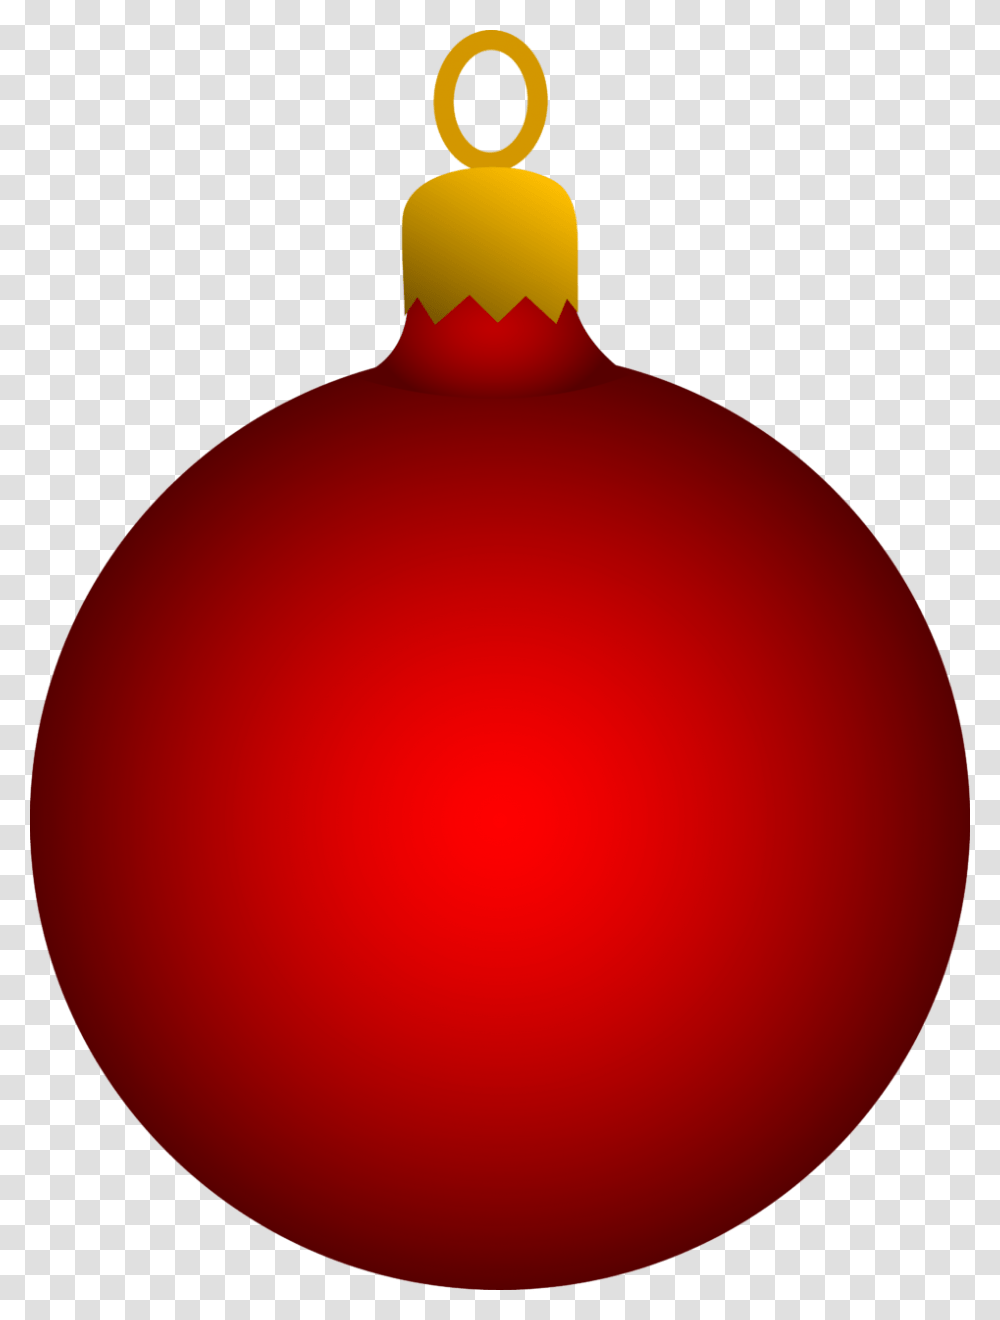 How To Make A Christmas Wreath With Ornaments Marvelous How, Balloon, Snowman, Winter, Outdoors Transparent Png